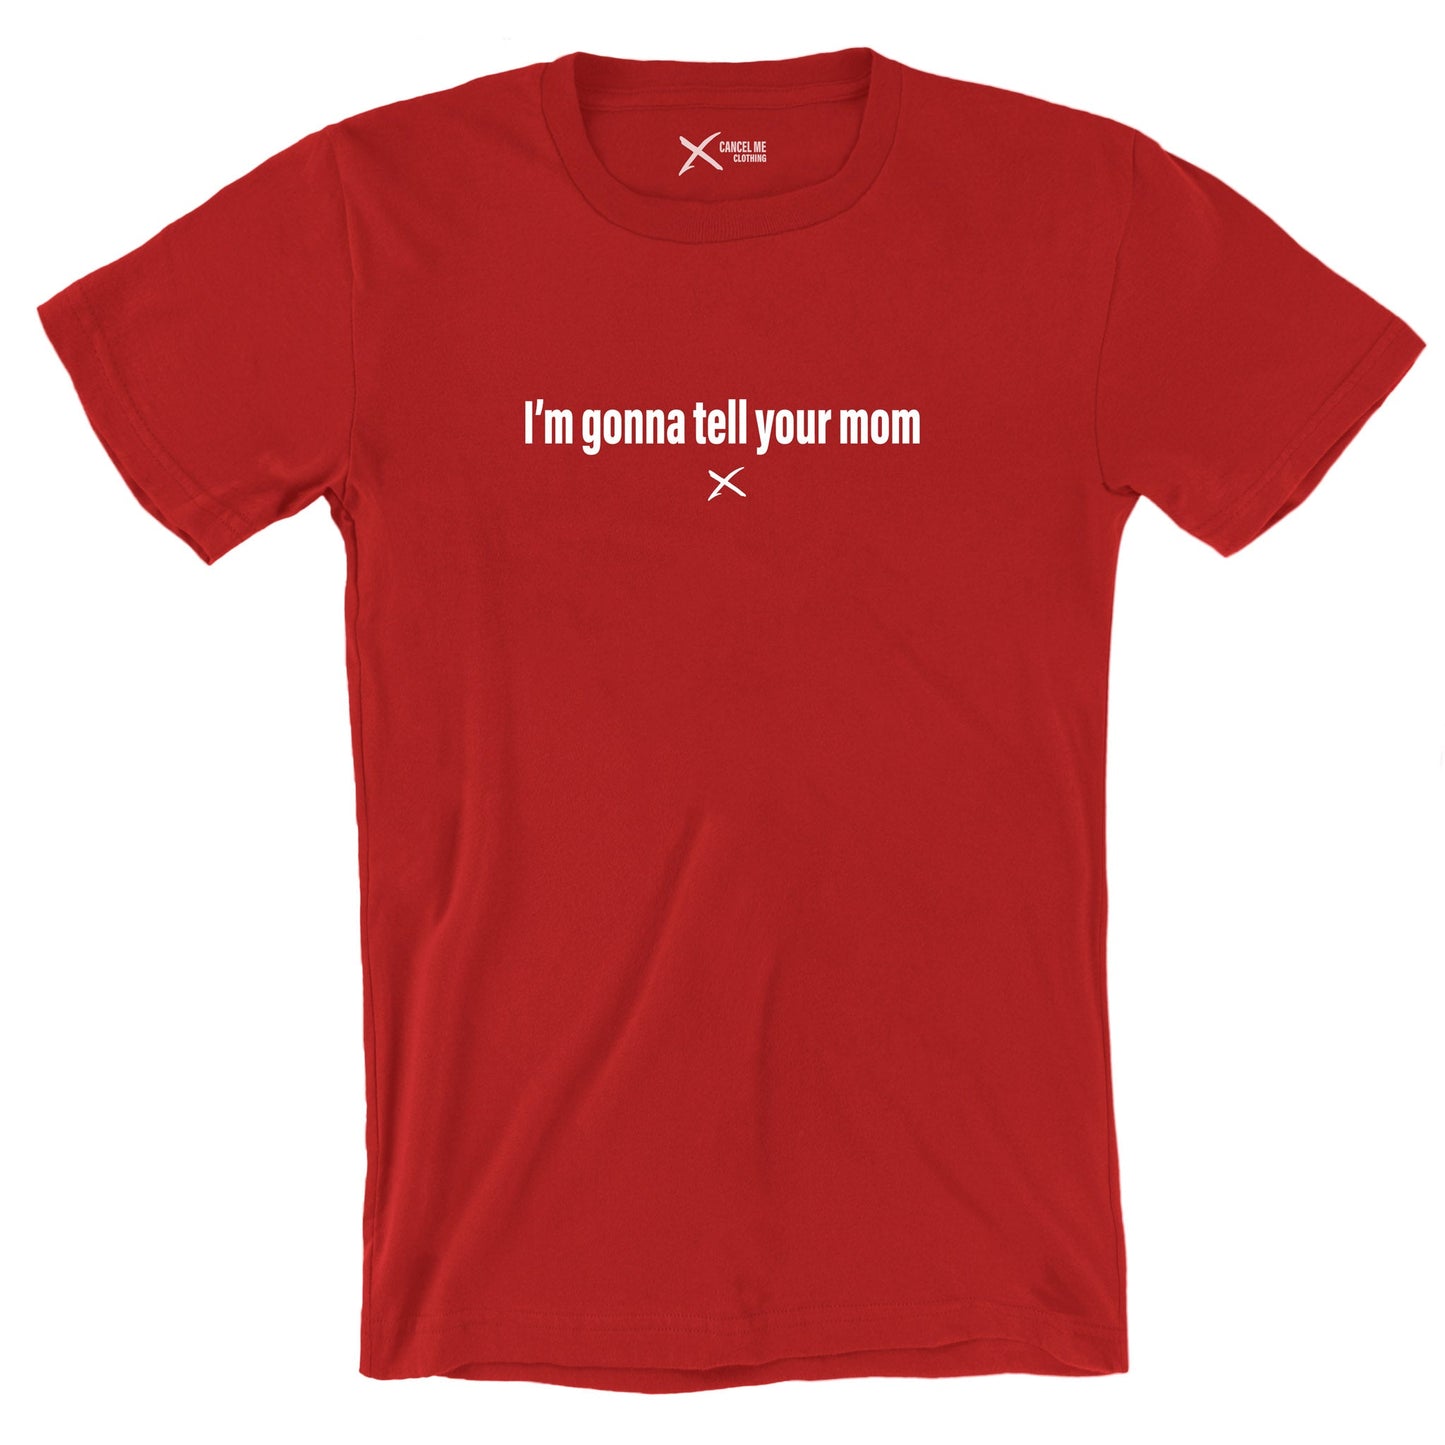 I'm gonna tell your mom - Shirt